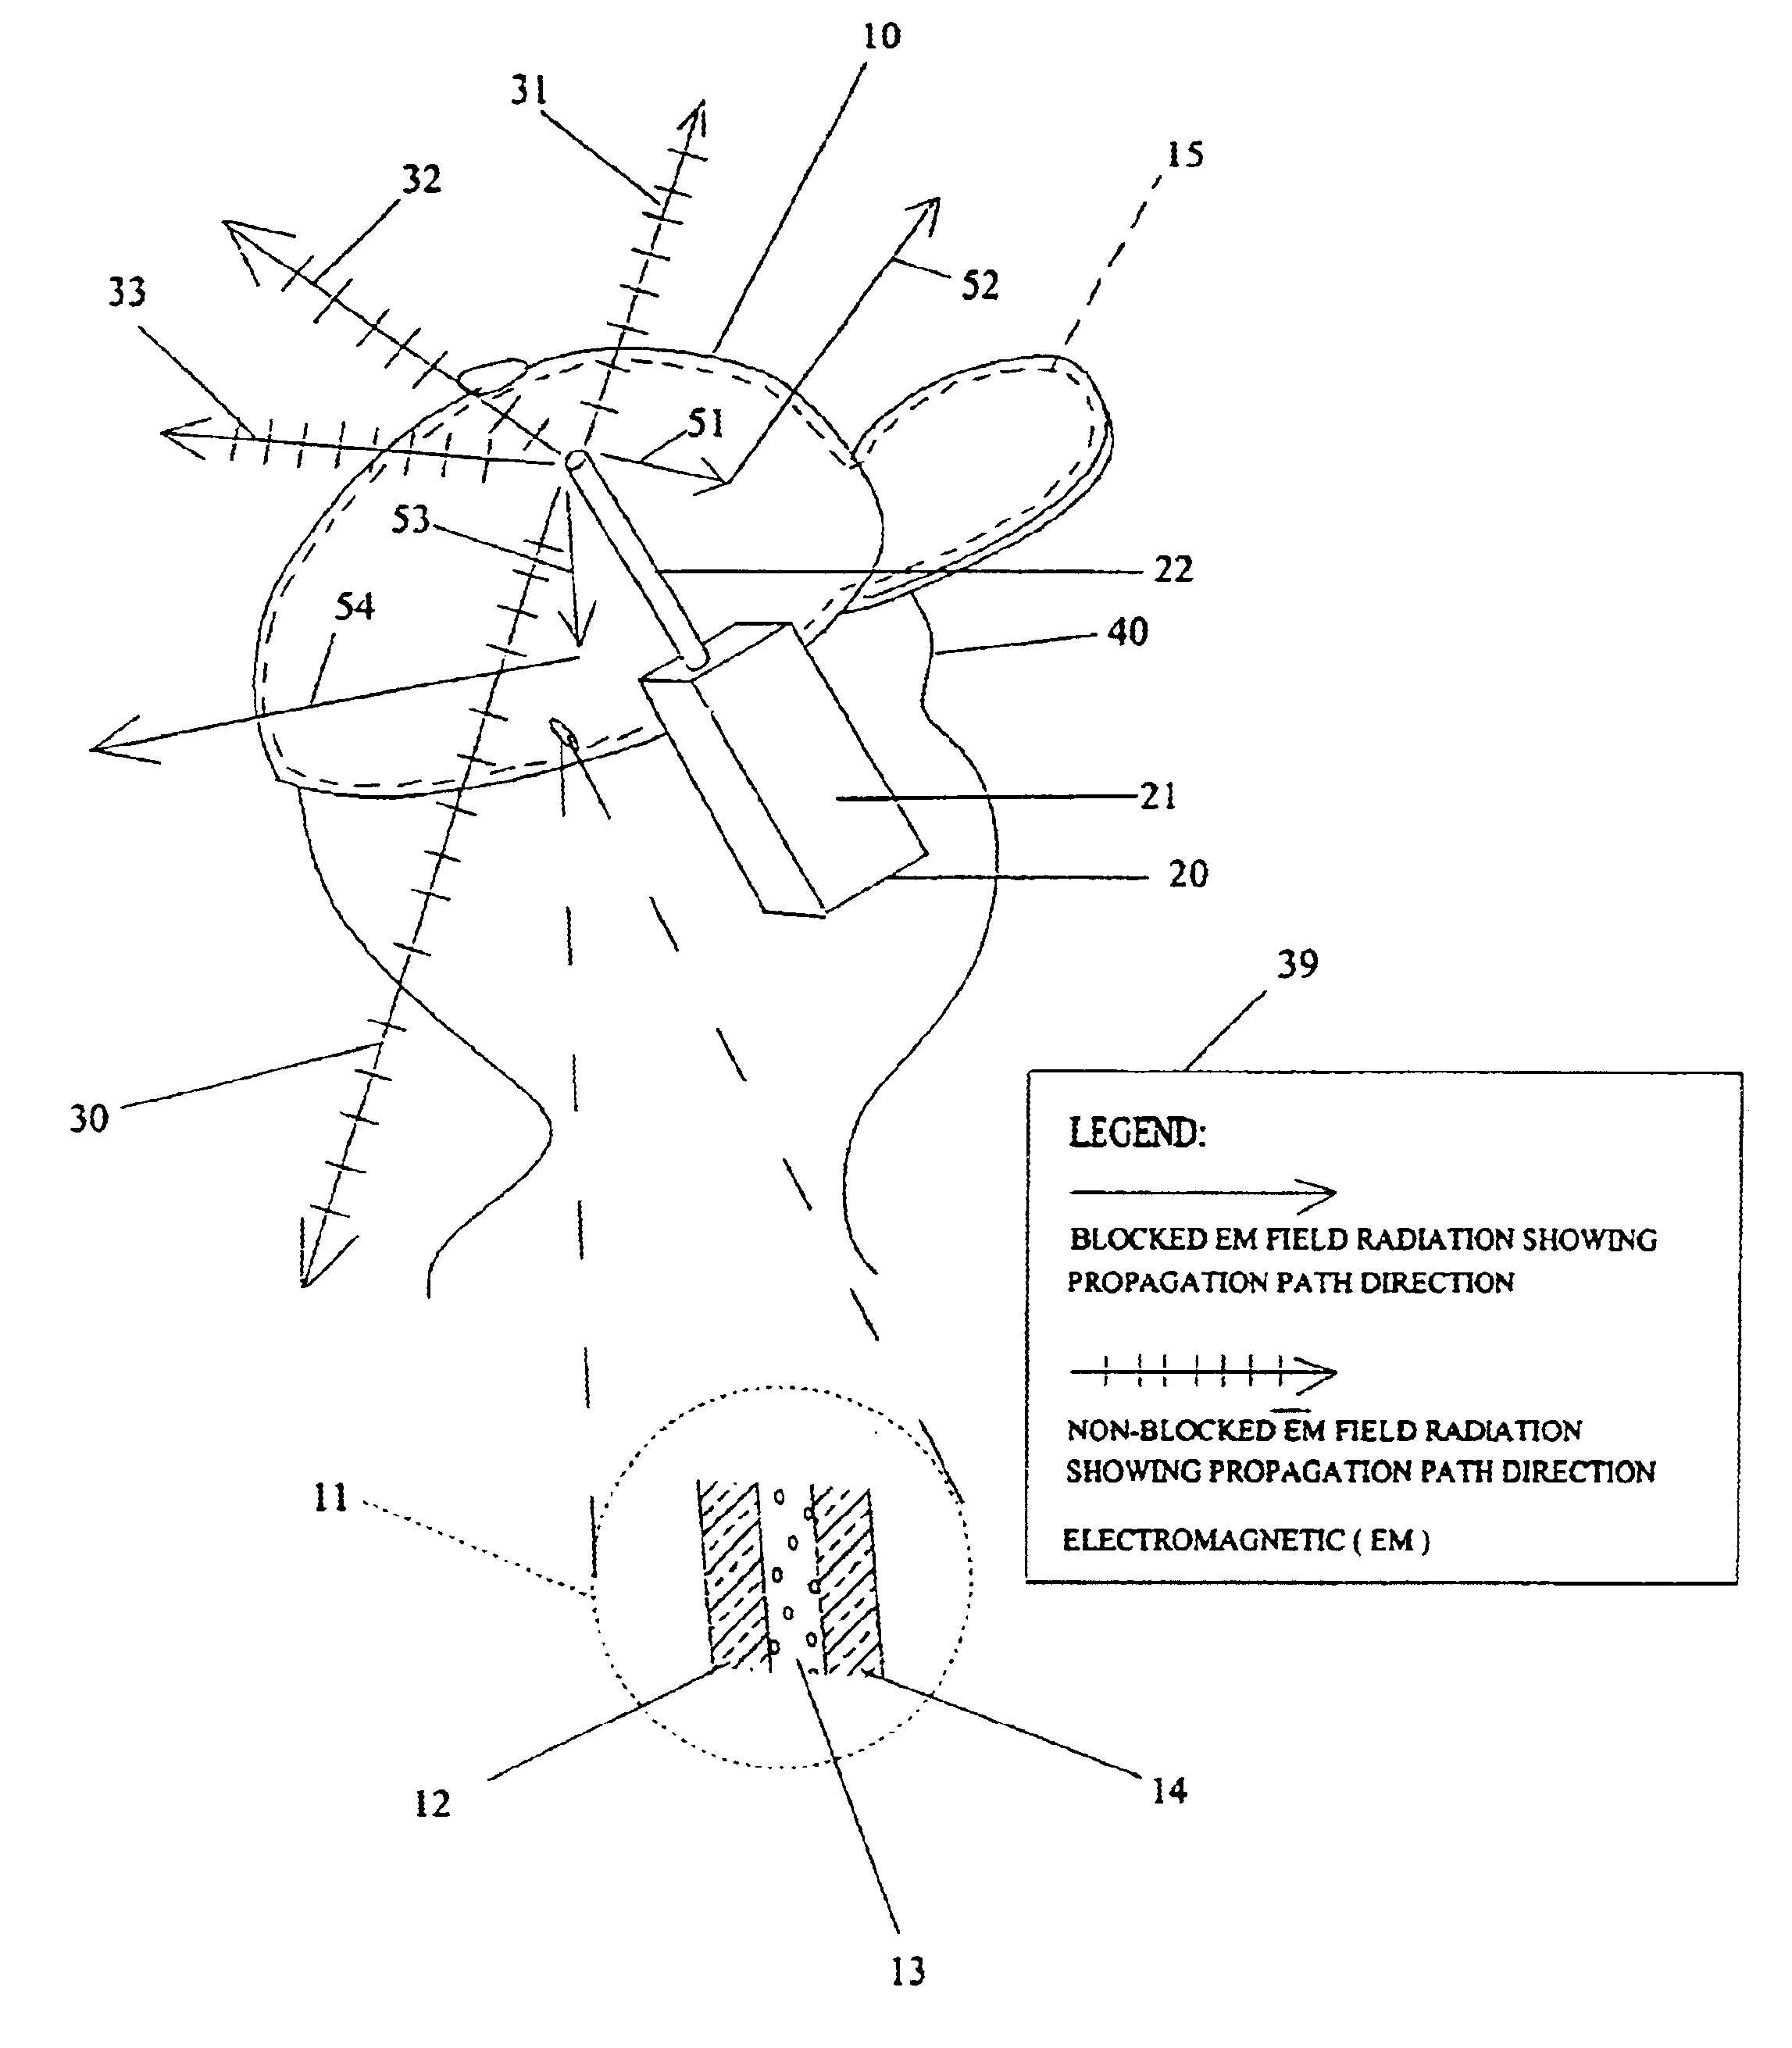 Device for radiation shielding wireless transmit/receive electronic equipment such as cellular telephones from close proximity direct line-of-sight electromagnetic fields